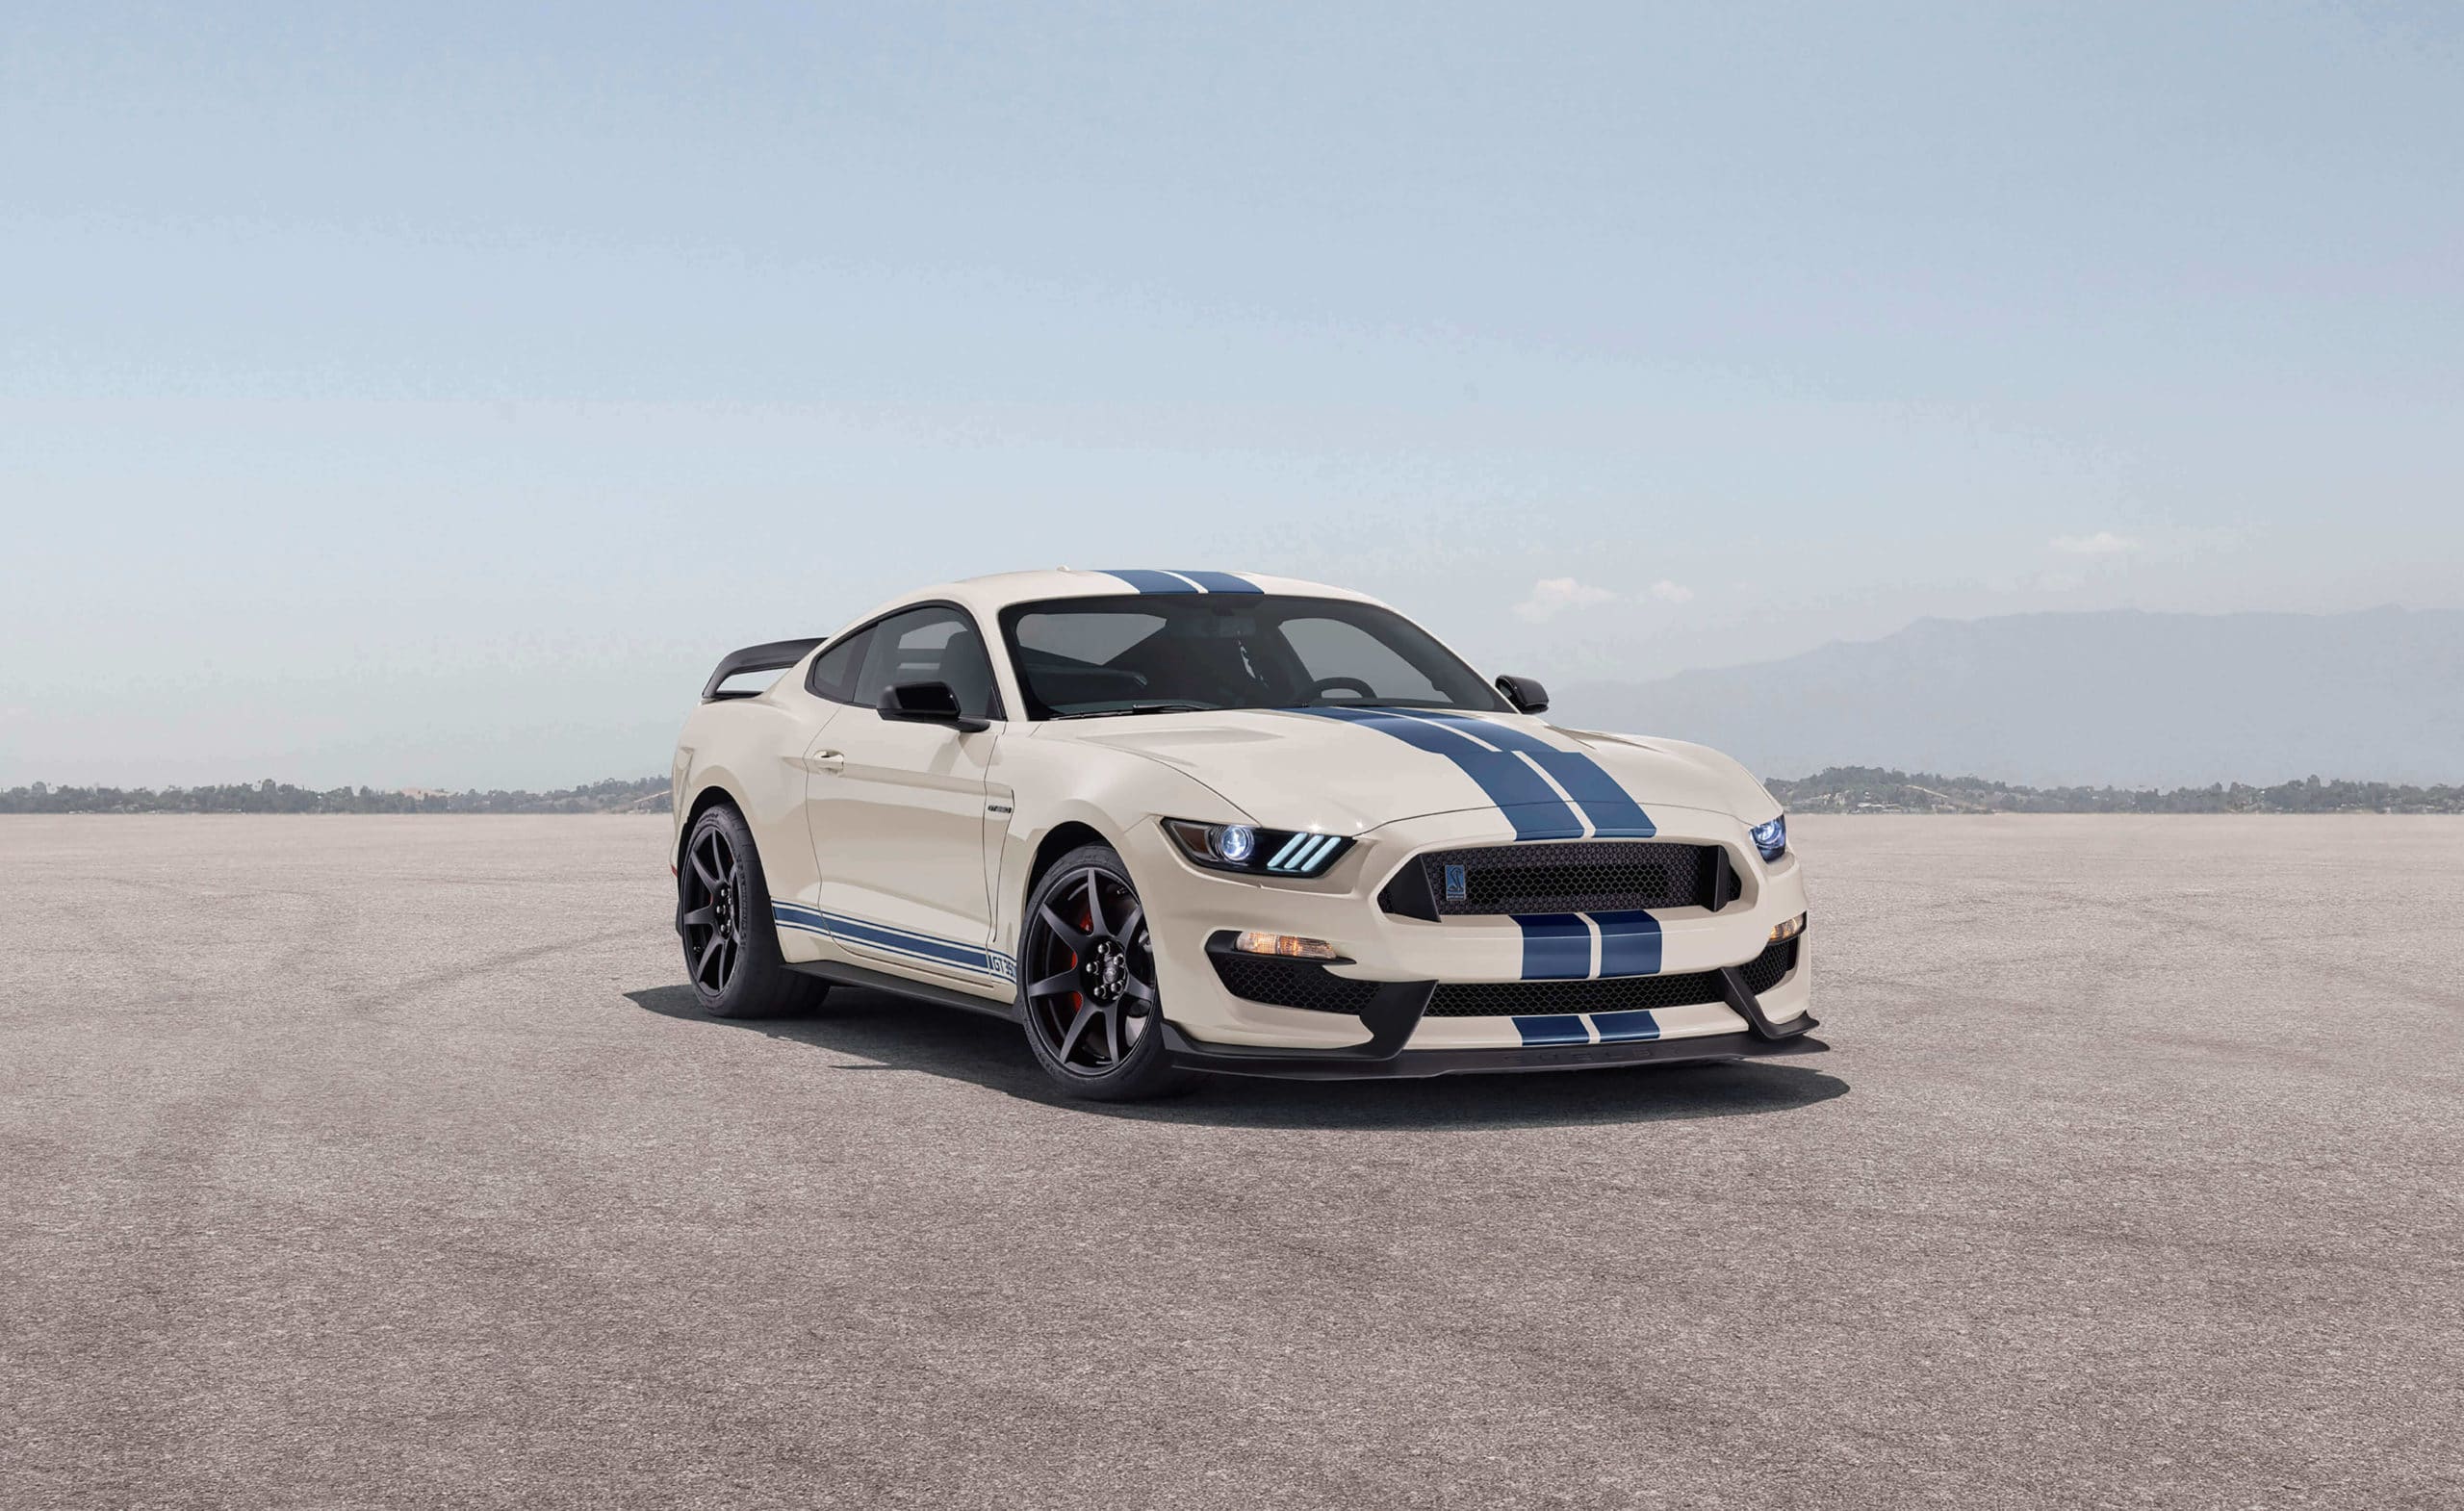 Heritage Edition Shelby GT350